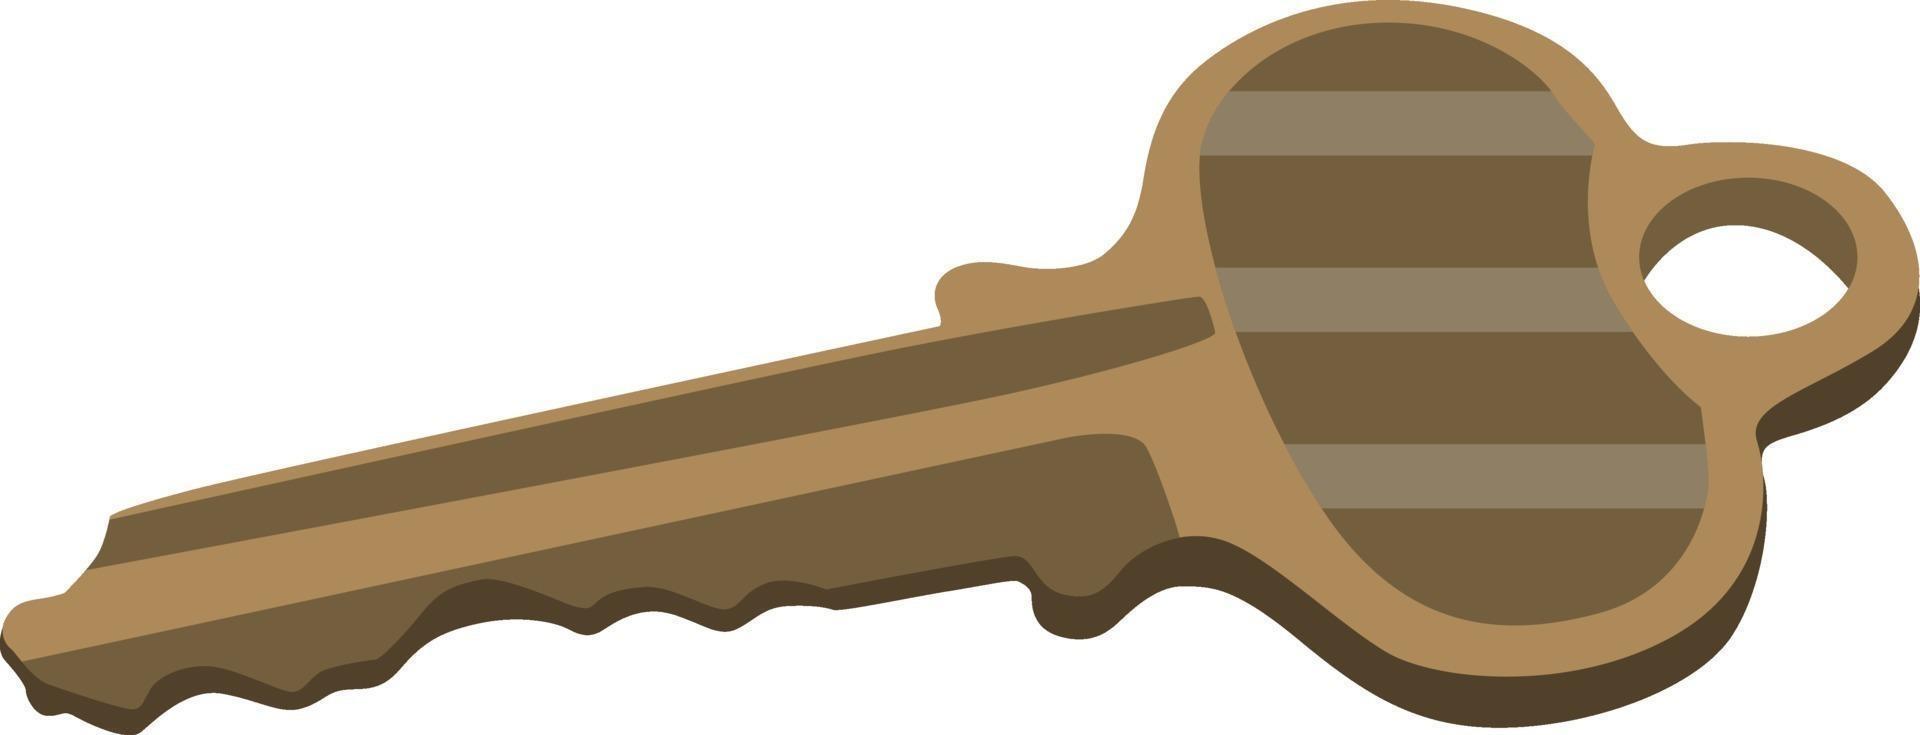 Old key, illustration, vector on a white background.